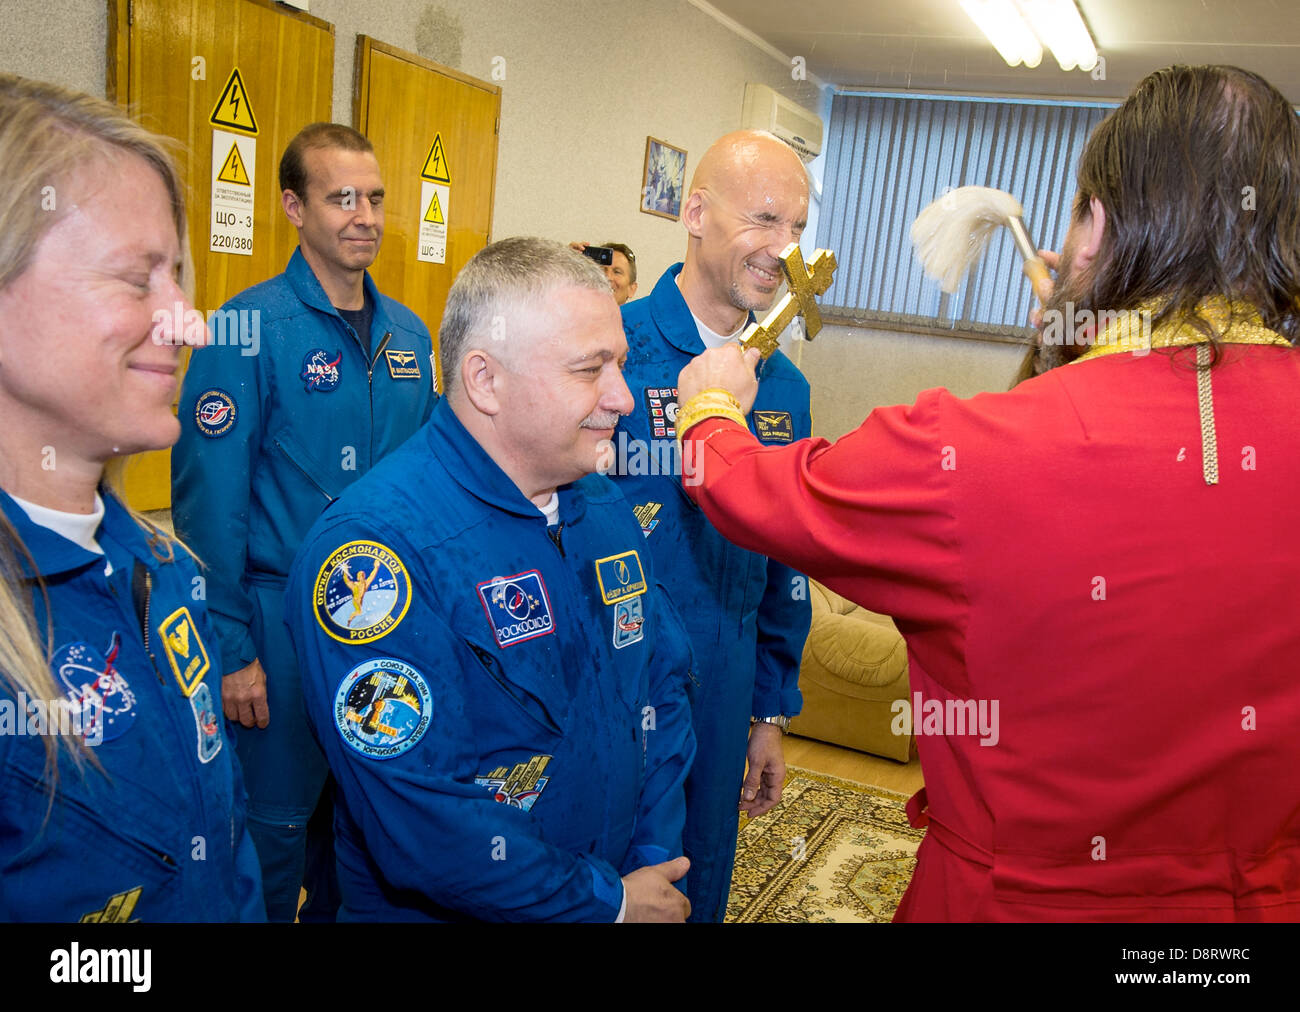 Expedition 36/37 Flight Engineer Karen Nyberg of NASA, left, Soyuz Commander Fyodor Yurchikhin of the Russian Federal Space Agency, center, and Flight Engineer Luca Parmitano of the European Space Agency, receive a traditional blessing from an Orthodox Priest prior to the three crew members departing the Cosmonaut Hotel for suit up and launch onboard a Soyuz to the International Space Station May 28, 2013 in Baikonur, Kazakhstan. Stock Photo